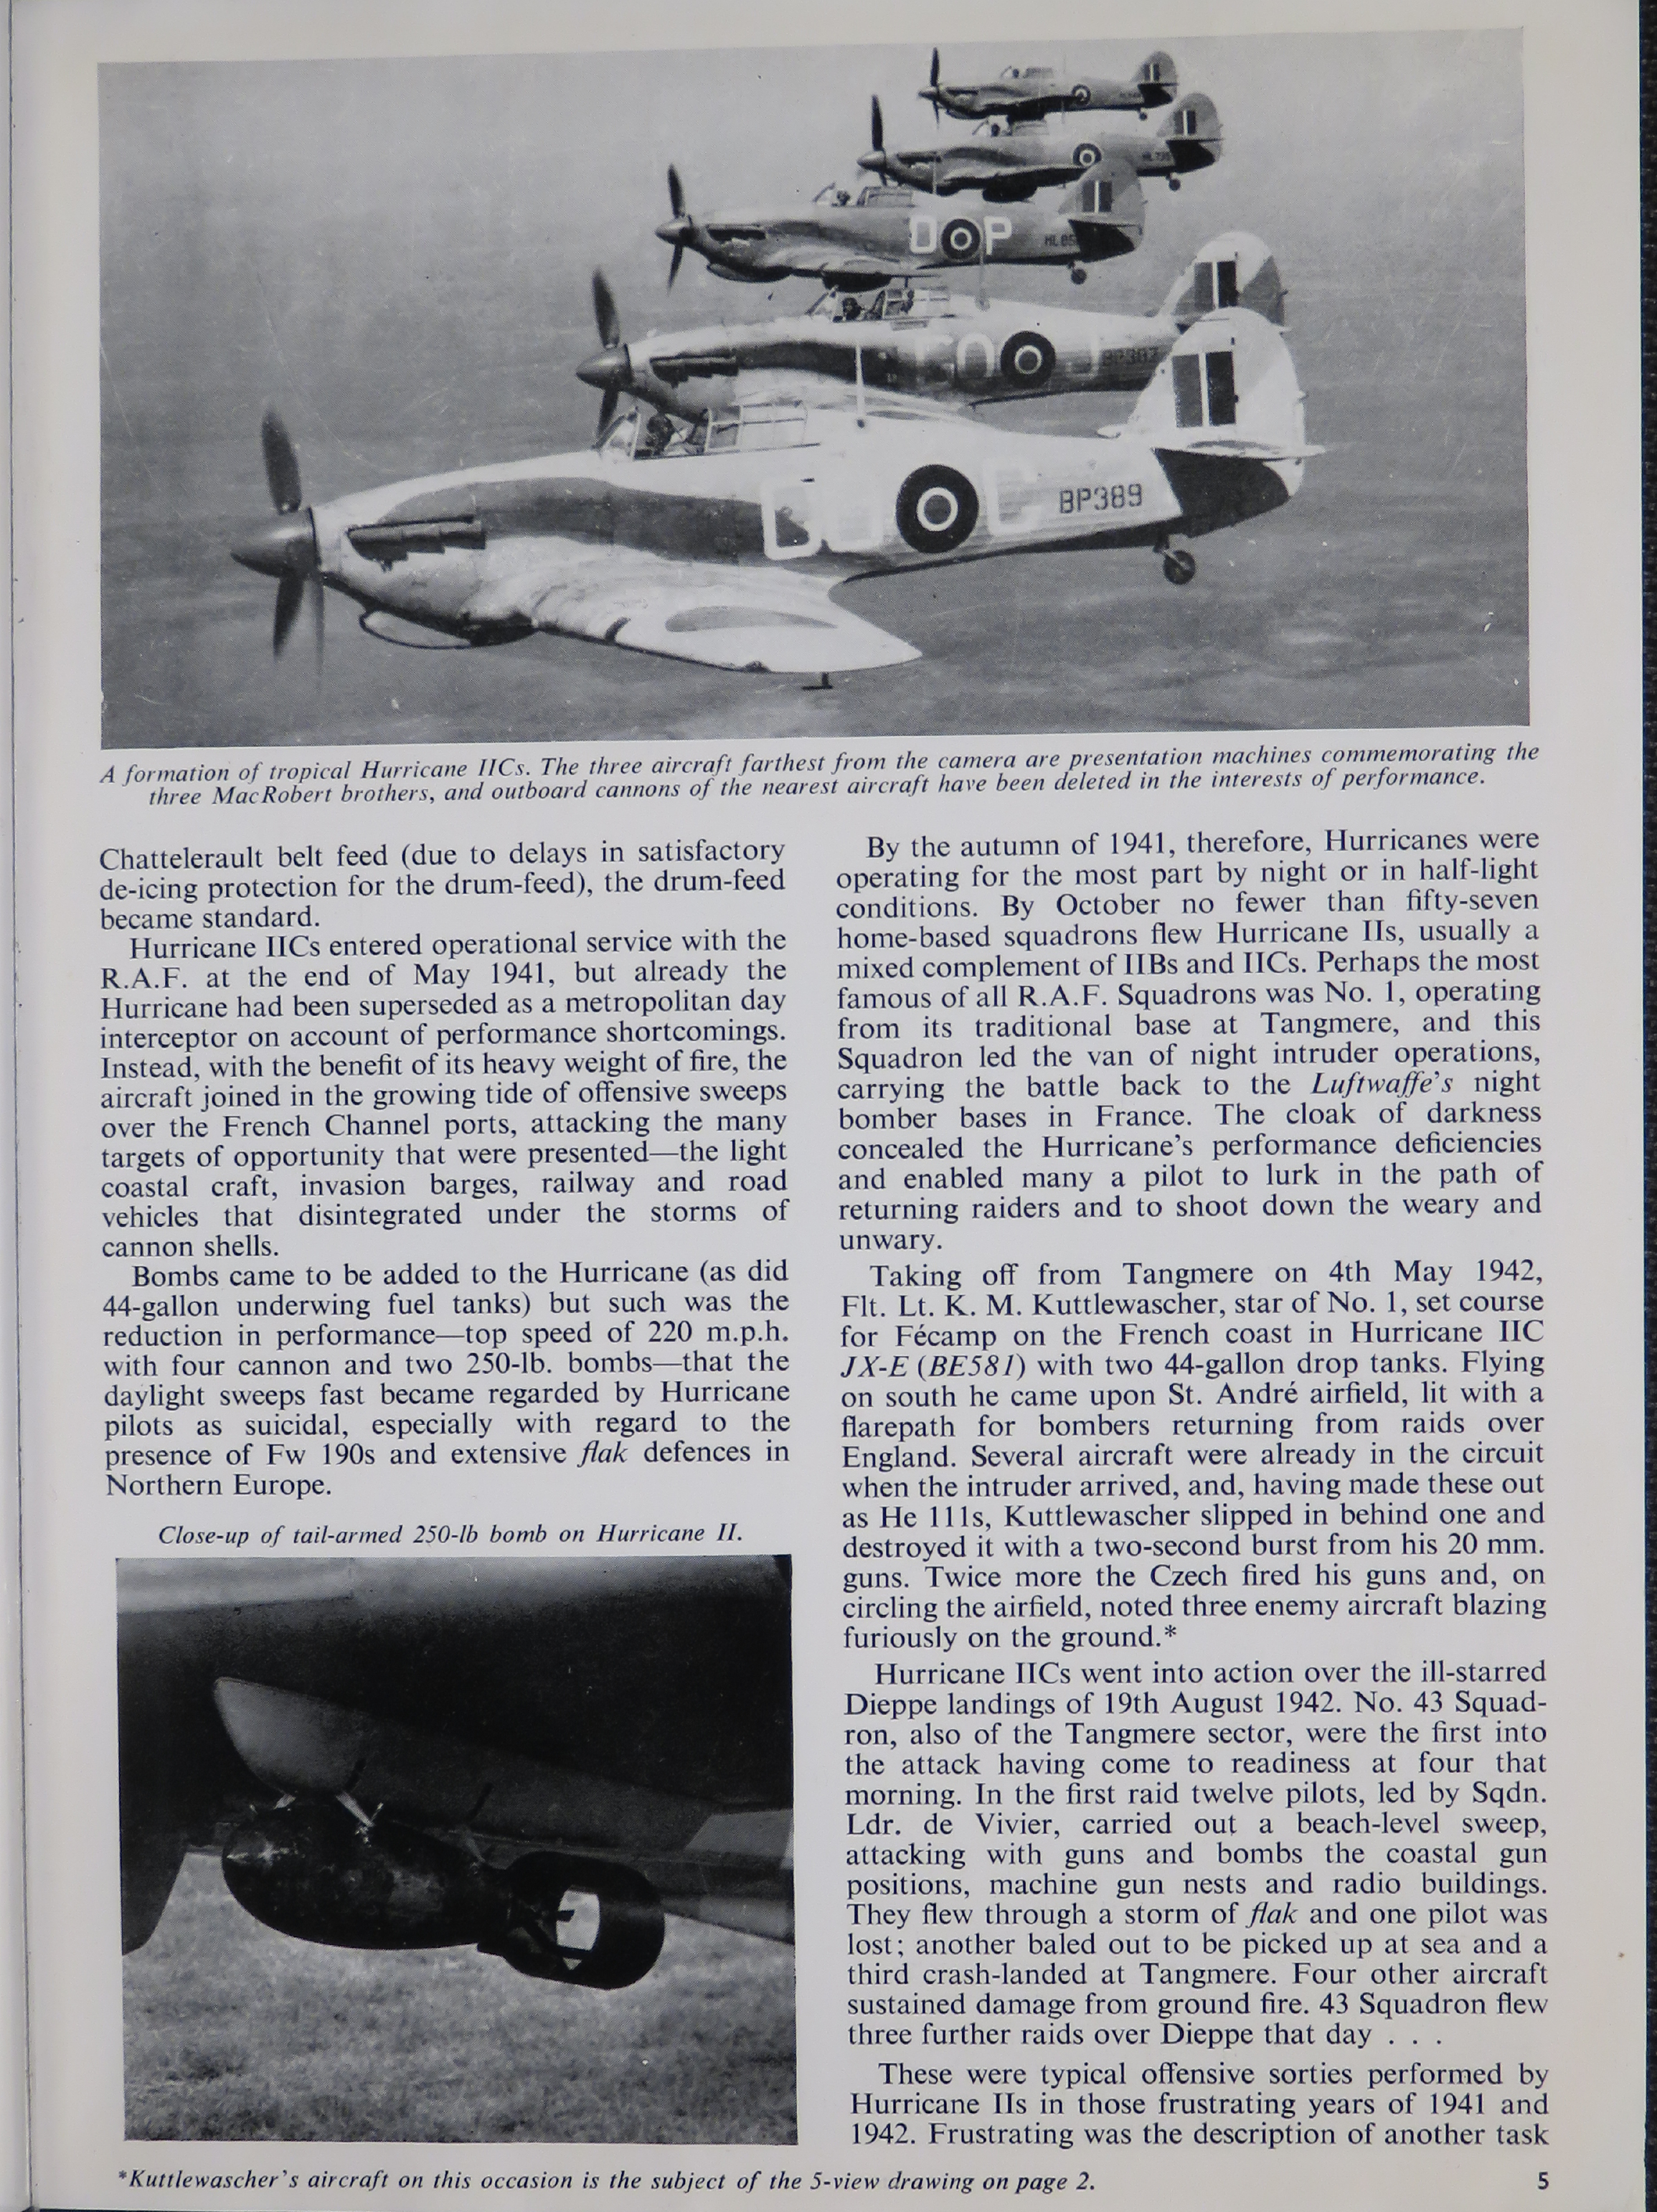 Sample page 5 from AirCorps Library document: Profile Publications; The Hawker Hurricane IIC